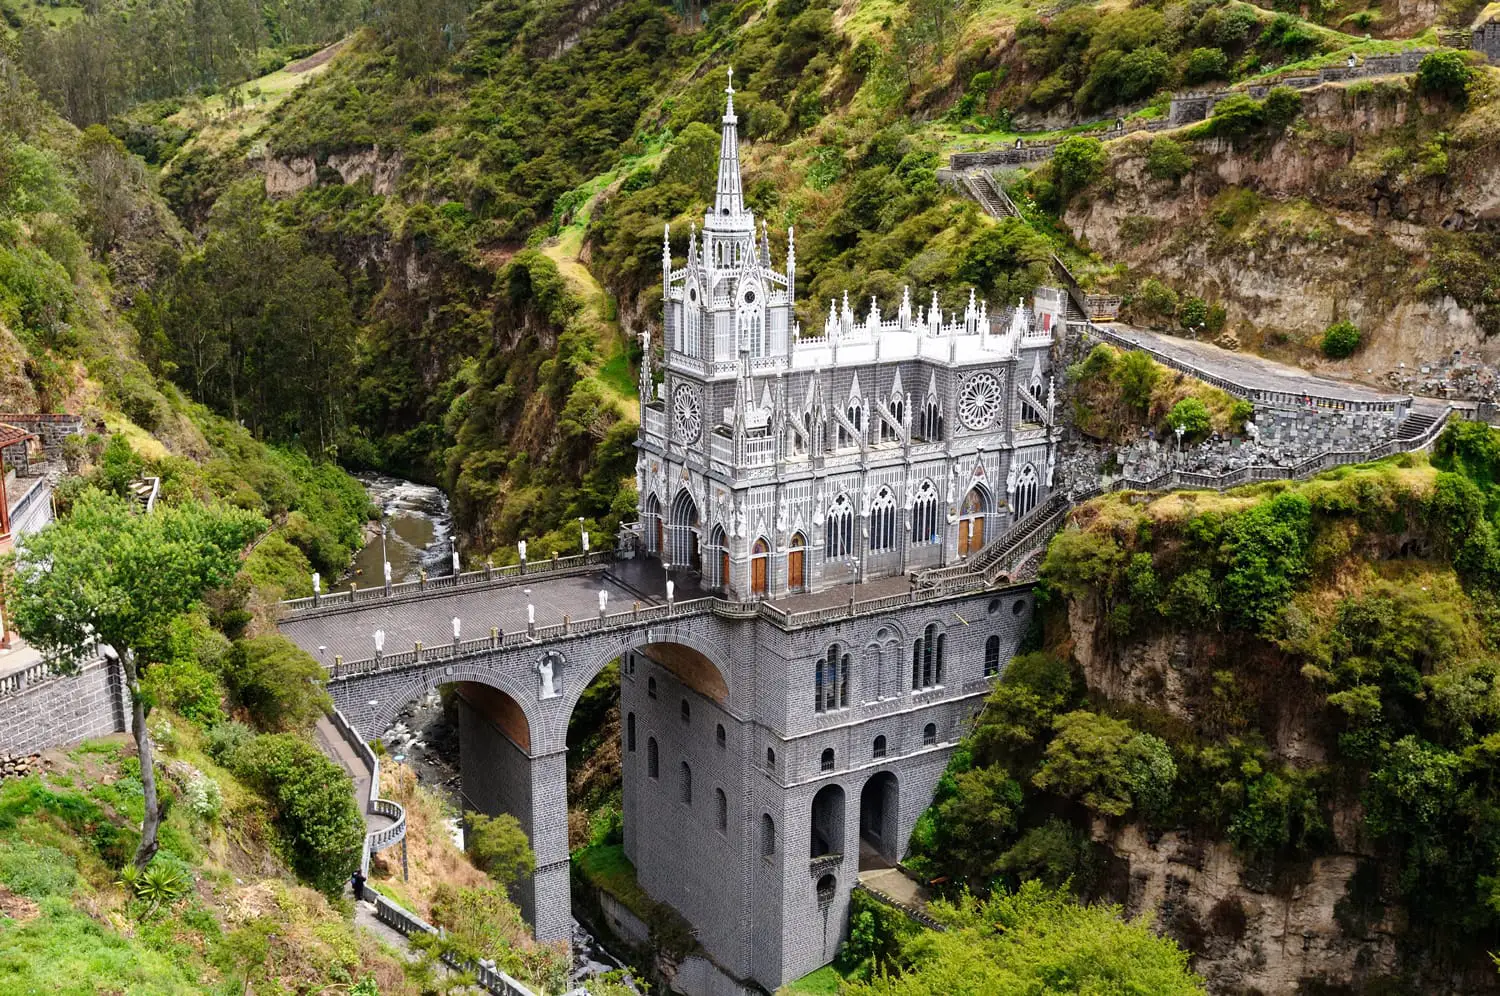 One of the most beautiful churches in the world. Sanctuary Las Lajas built in Colombia close to the Ecuador border.